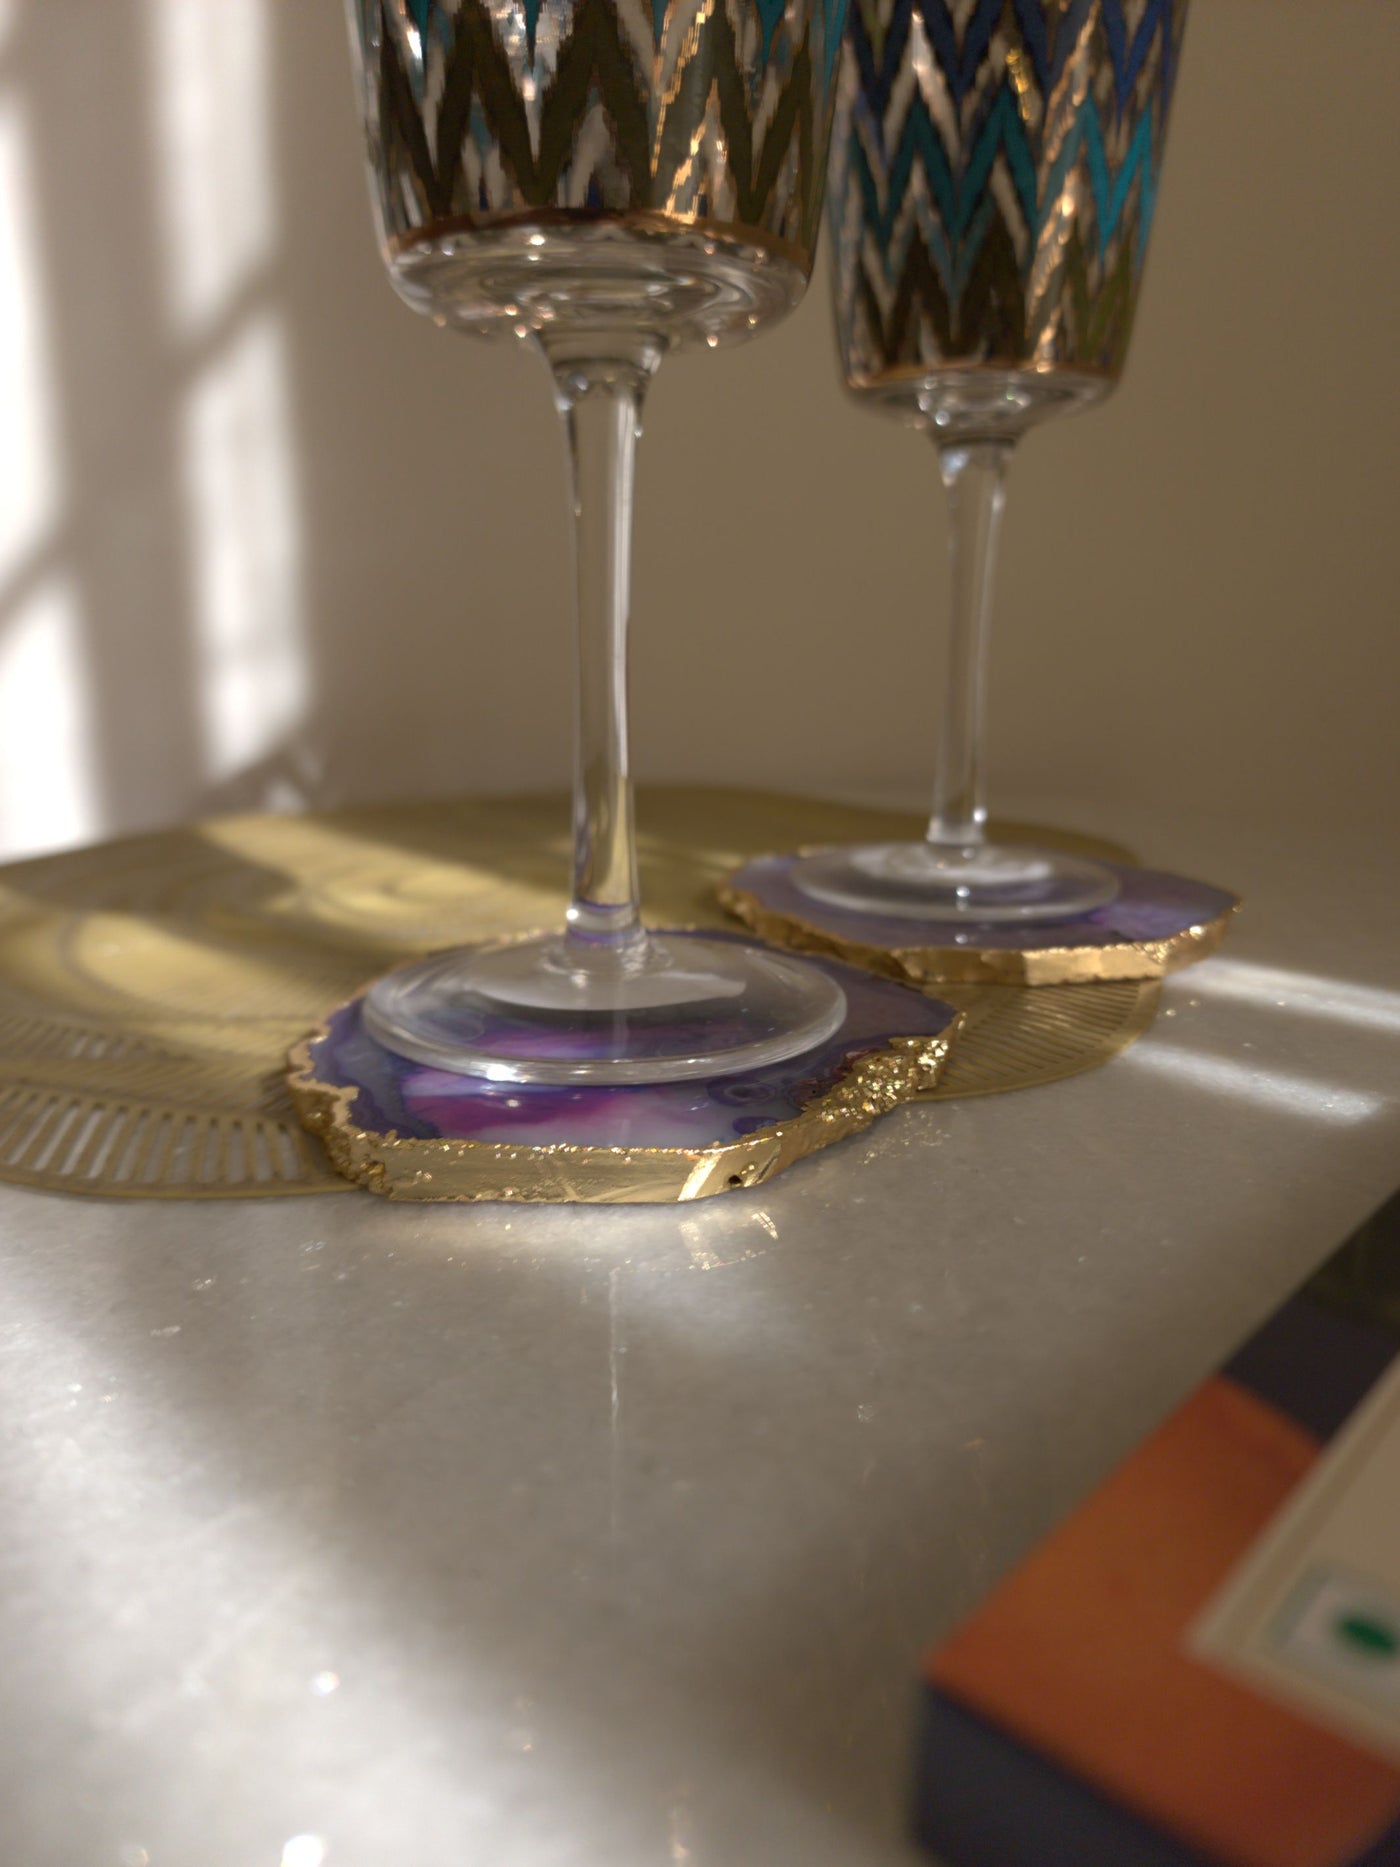 Agate Coaster Set Of 2 - Purple with Gold Plated Edge